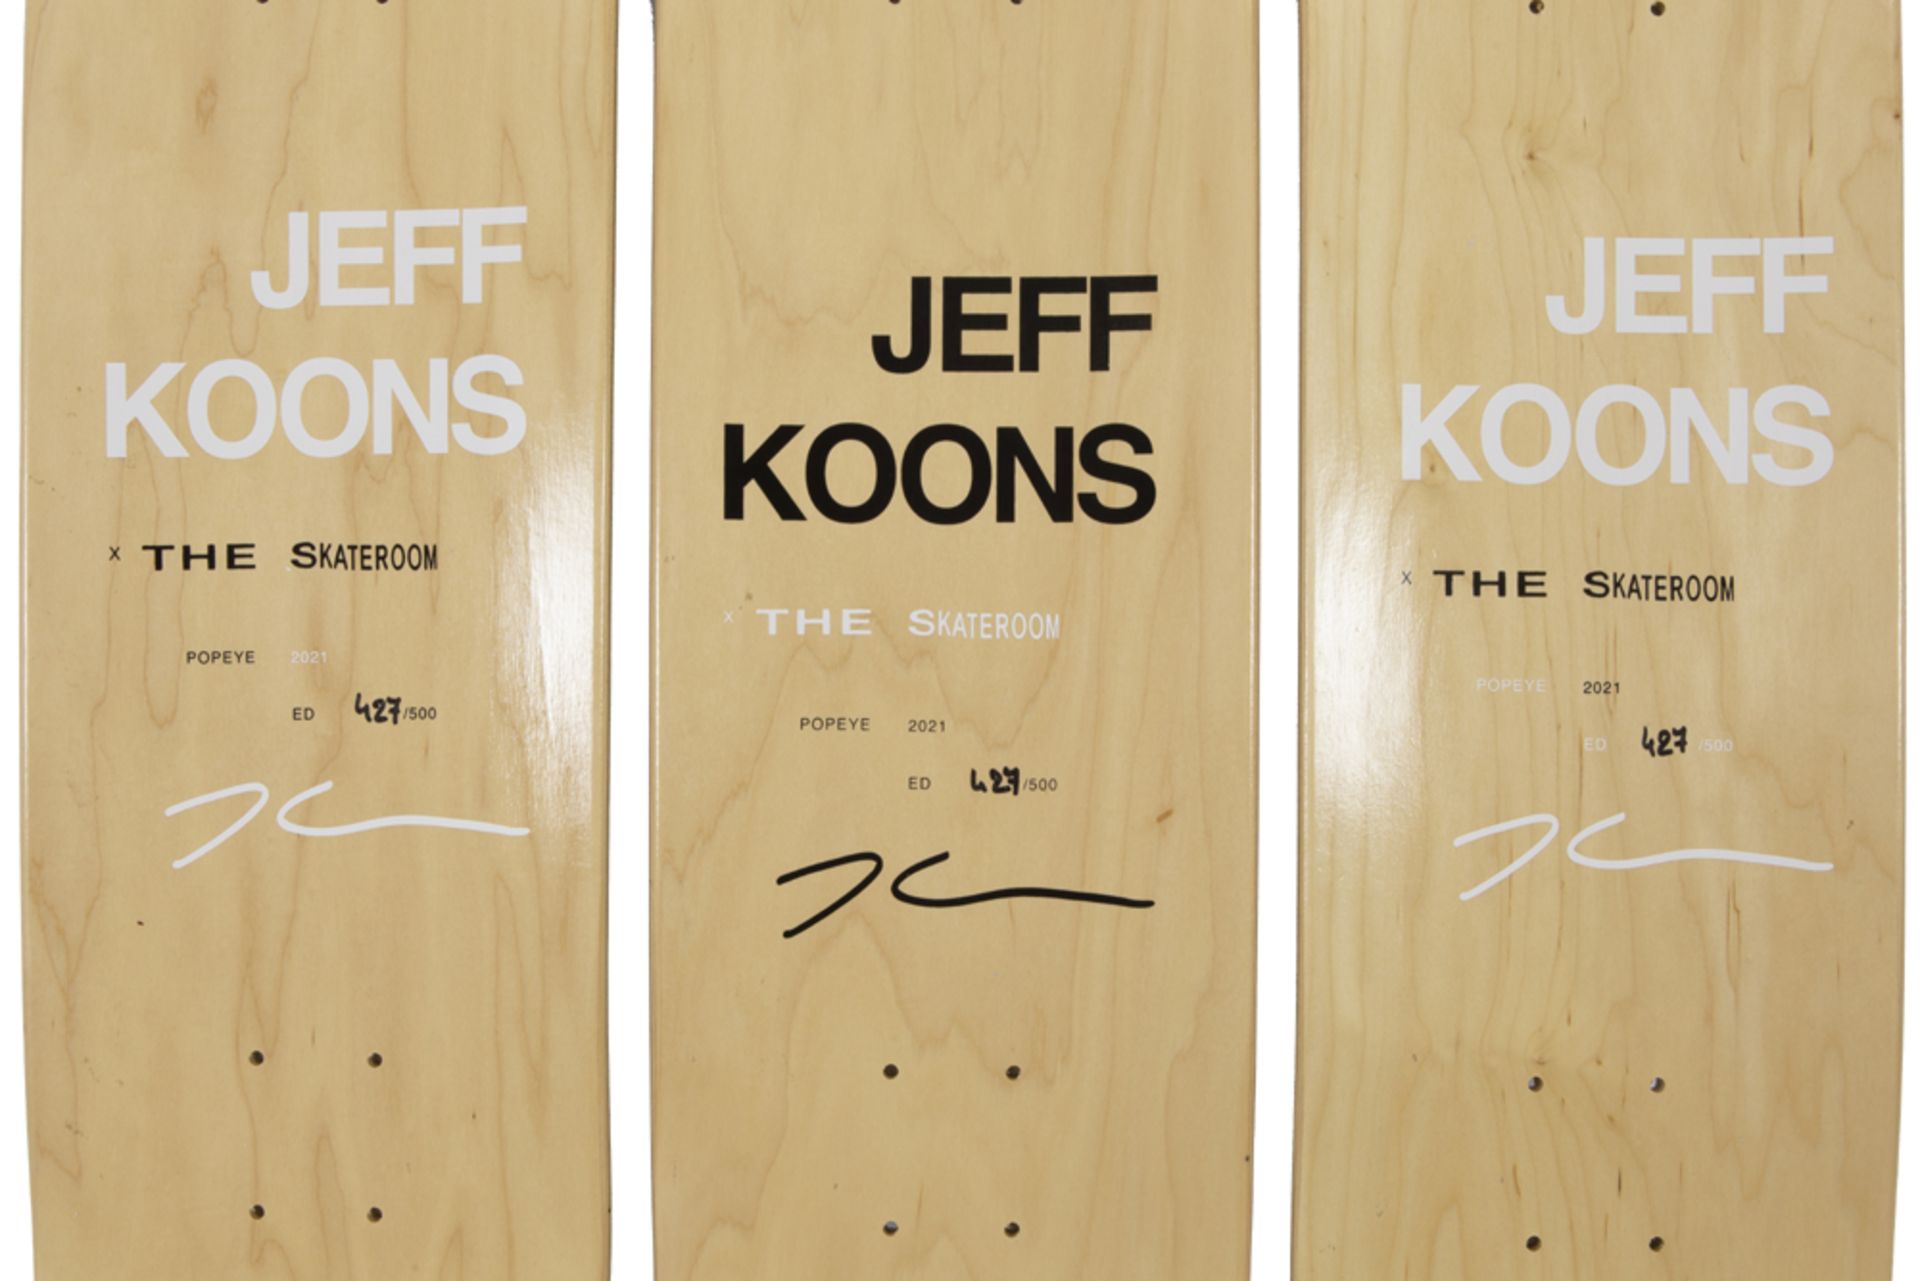 Jeff Koons plate signed "Popeye" triptych on skateboards dd 2021, an edition of 500 ex. with - Image 3 of 8